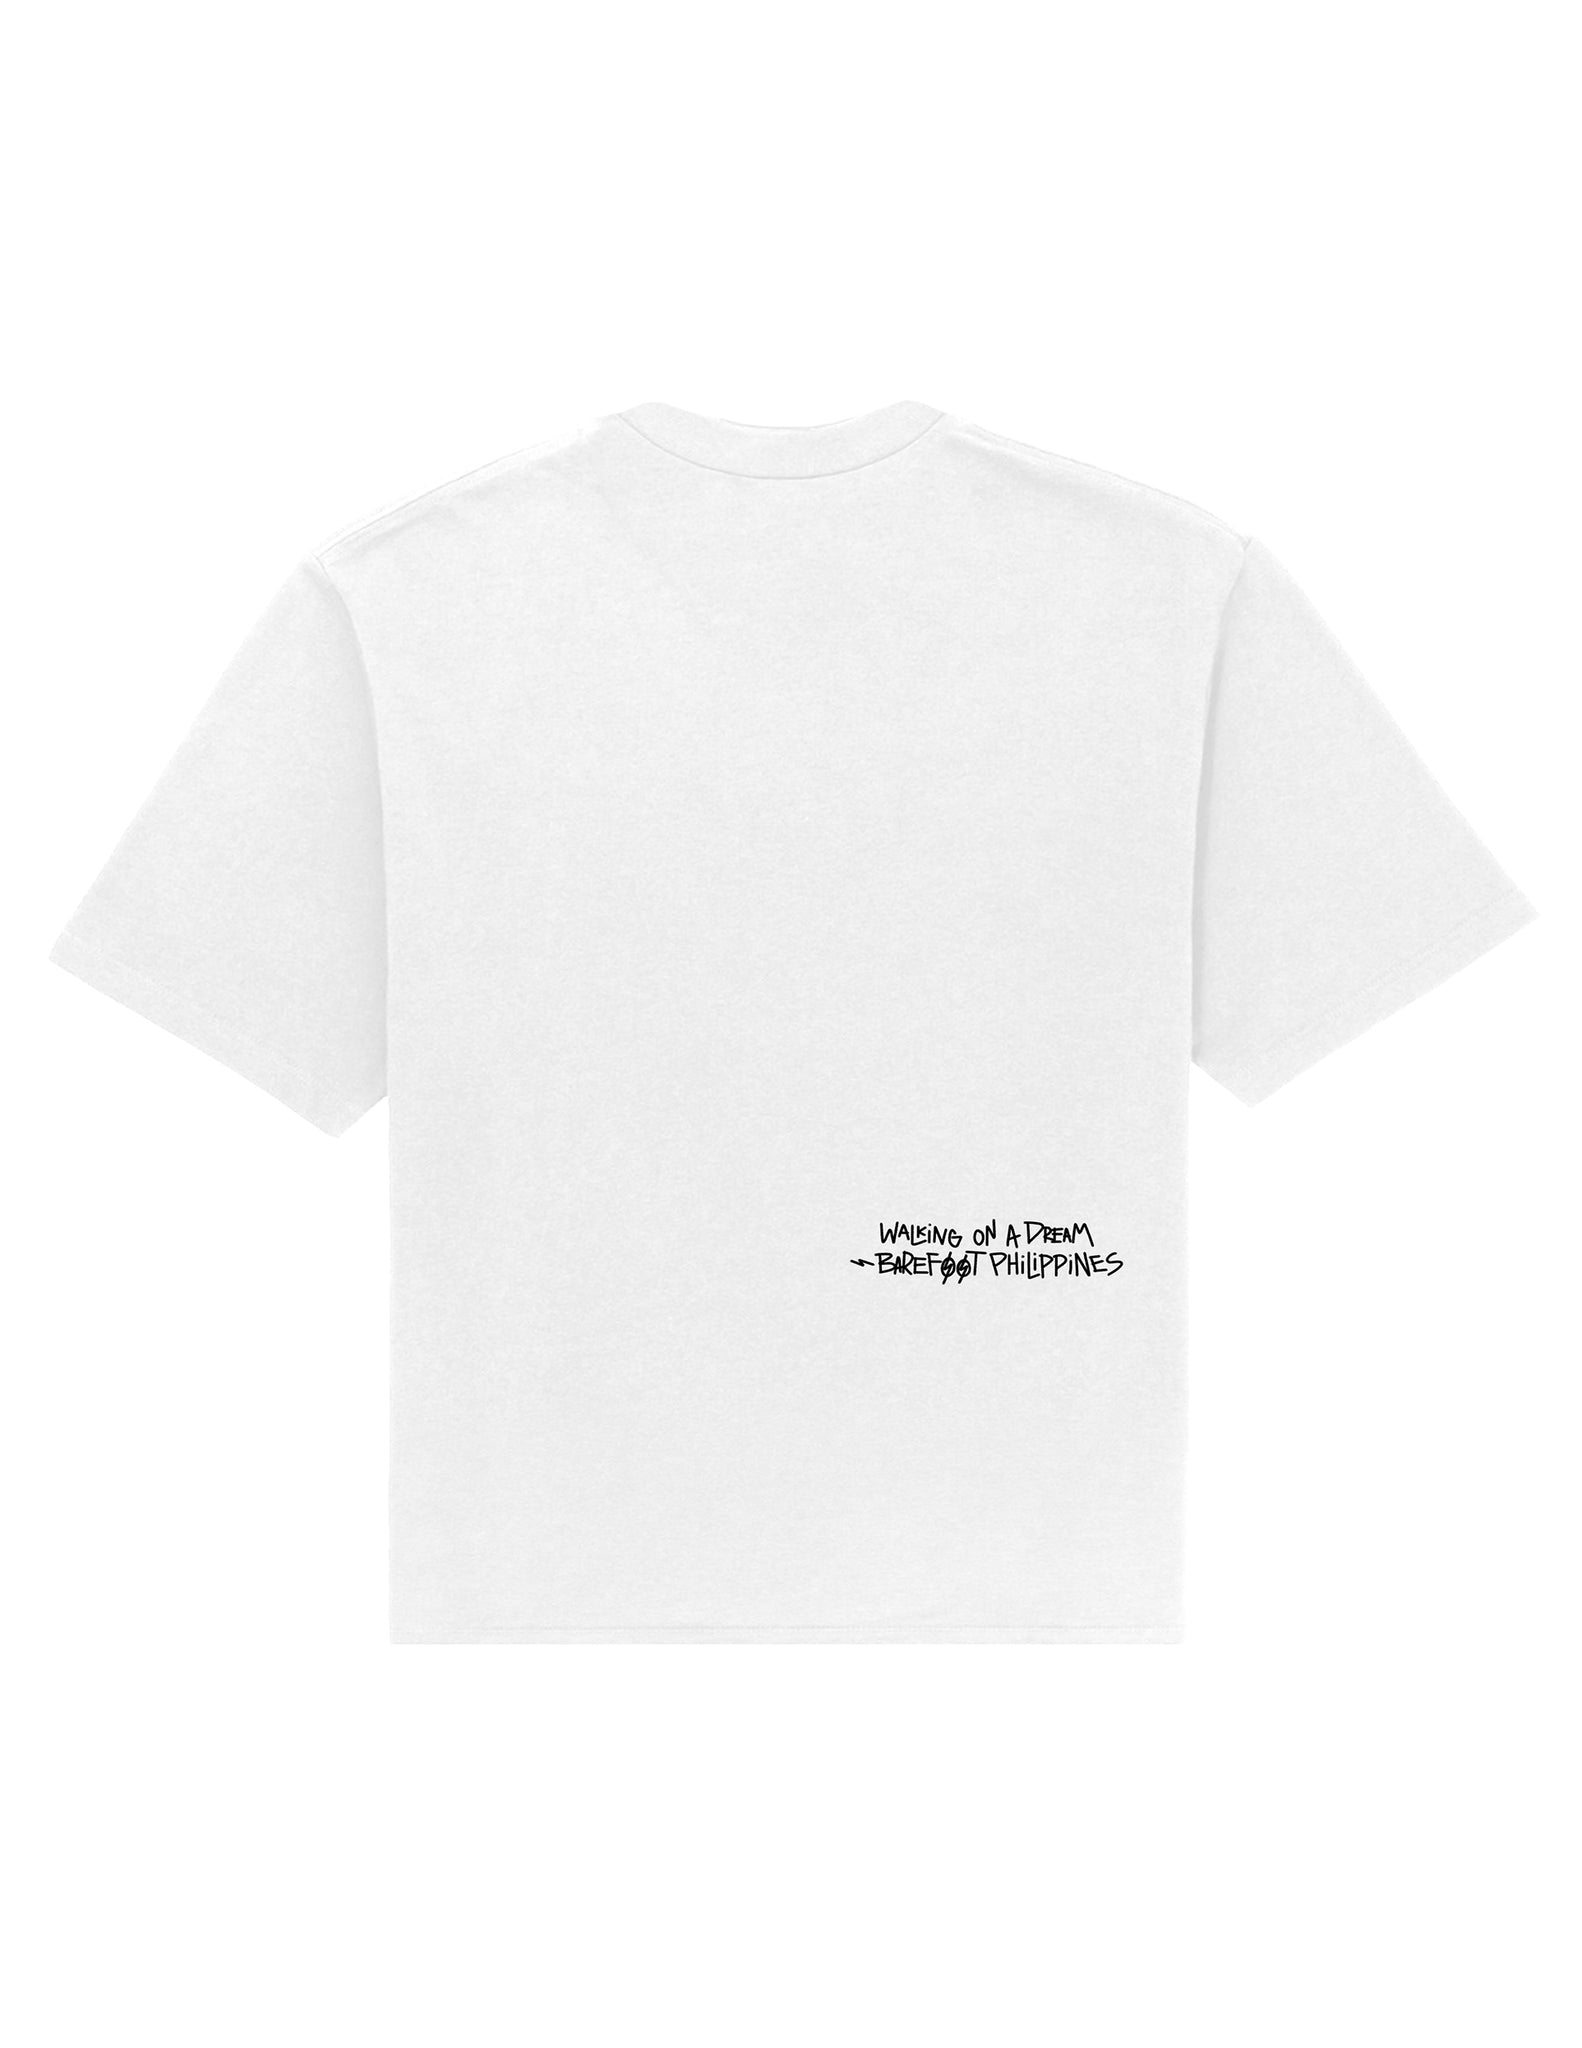 Syndrome Cares x Barefoot Sketchbook Tee